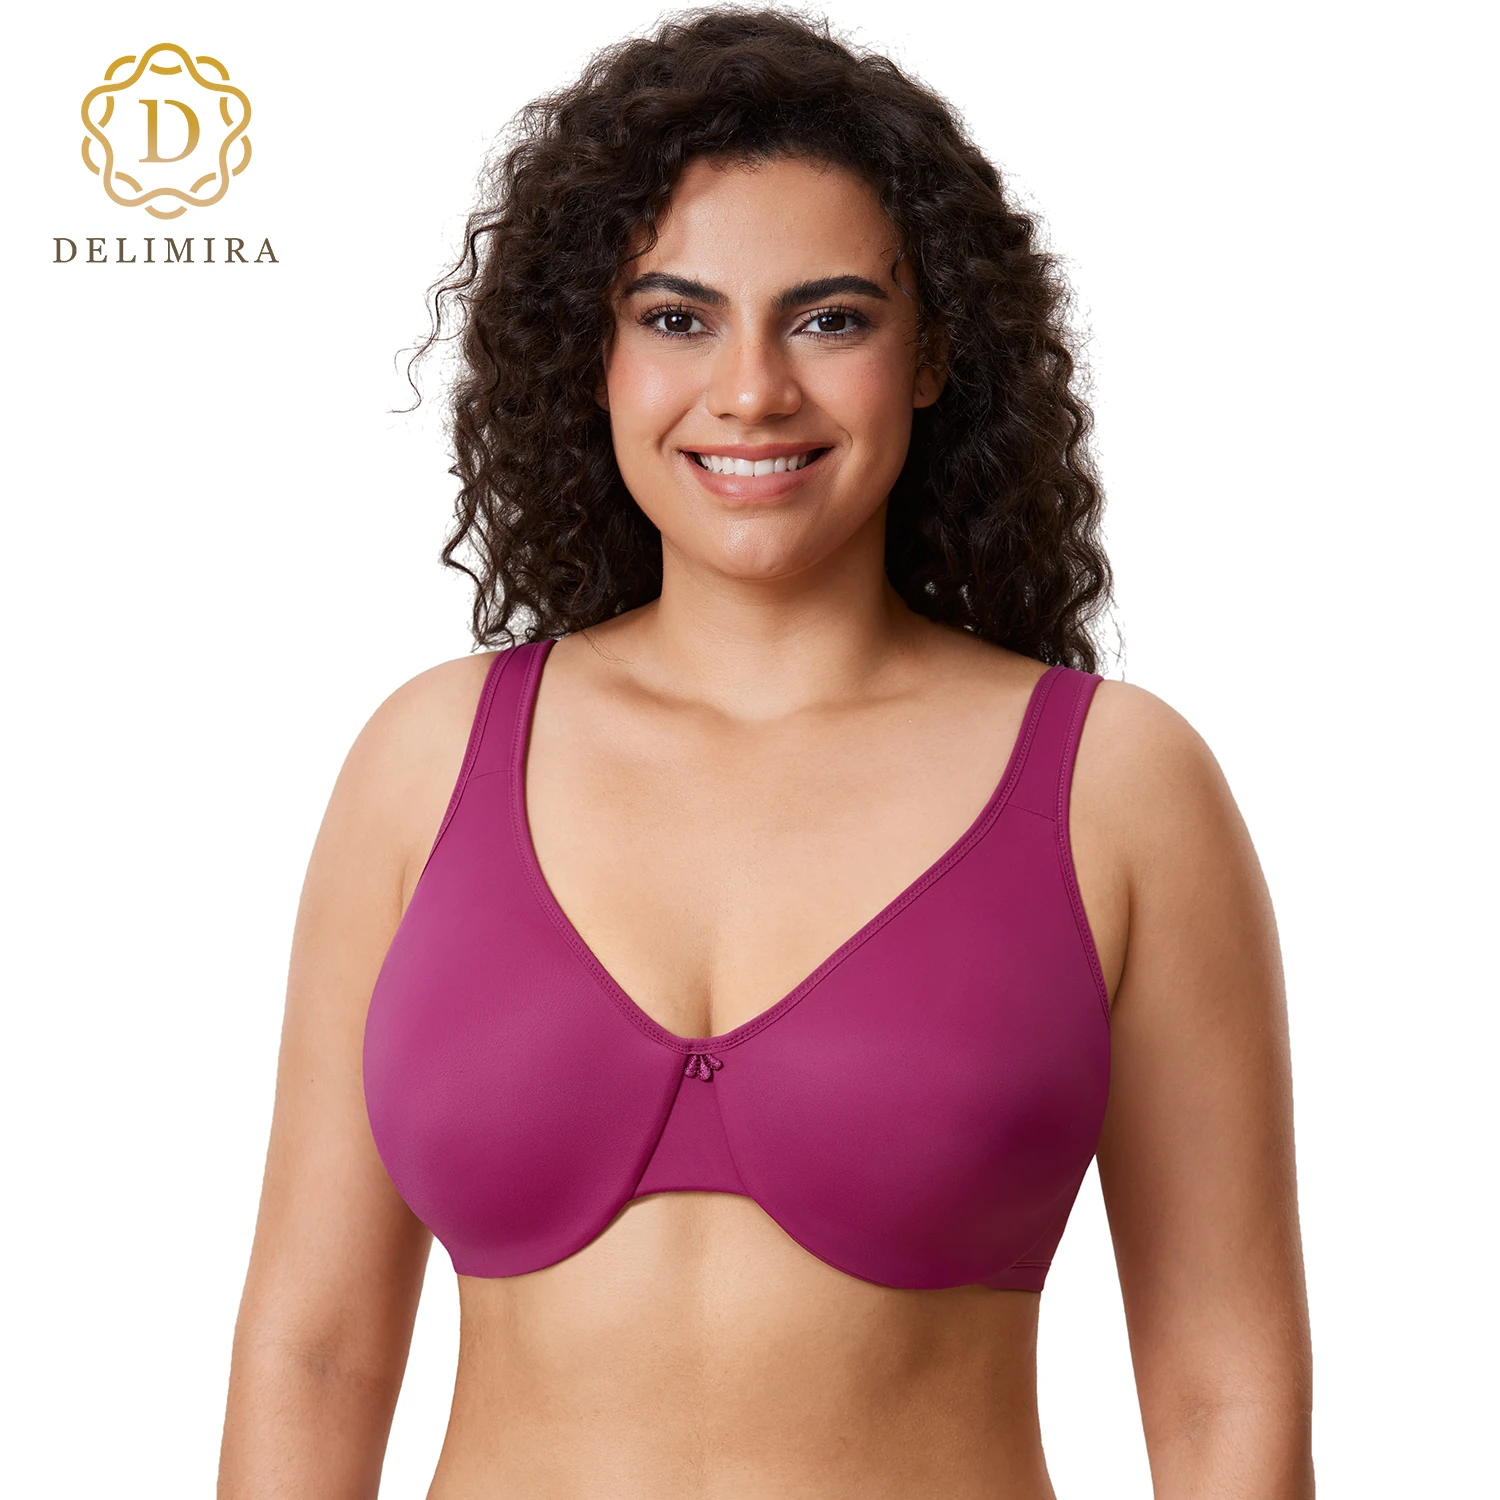 Delimira Minimizer Bra For Women Plus Size Seamless Bra Smooth Full Figure Underwire Comfortable Brassiere D DD E F plus size bra 30 32 34 36 38 40 42 44 46 c d dd ddd e f ff g cup underwire push up sexy lingerie lace bras for women brassiere